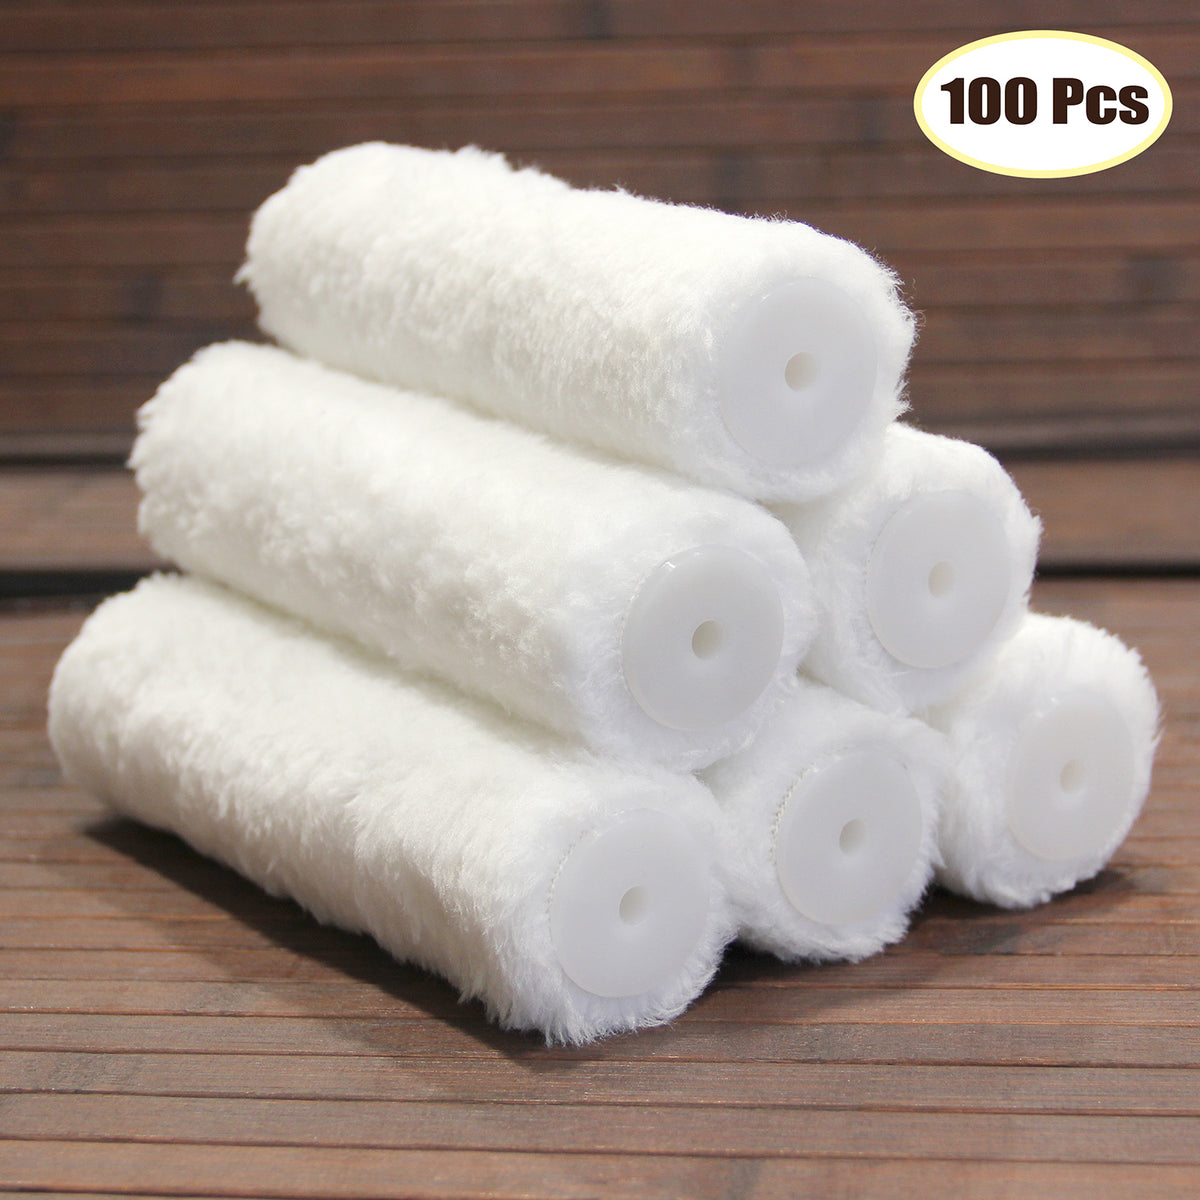 7" x 3/8" Nap Win Paint Lint-Free High Density Knitted Polyester Fabric Jumbo Mini Roller Covers